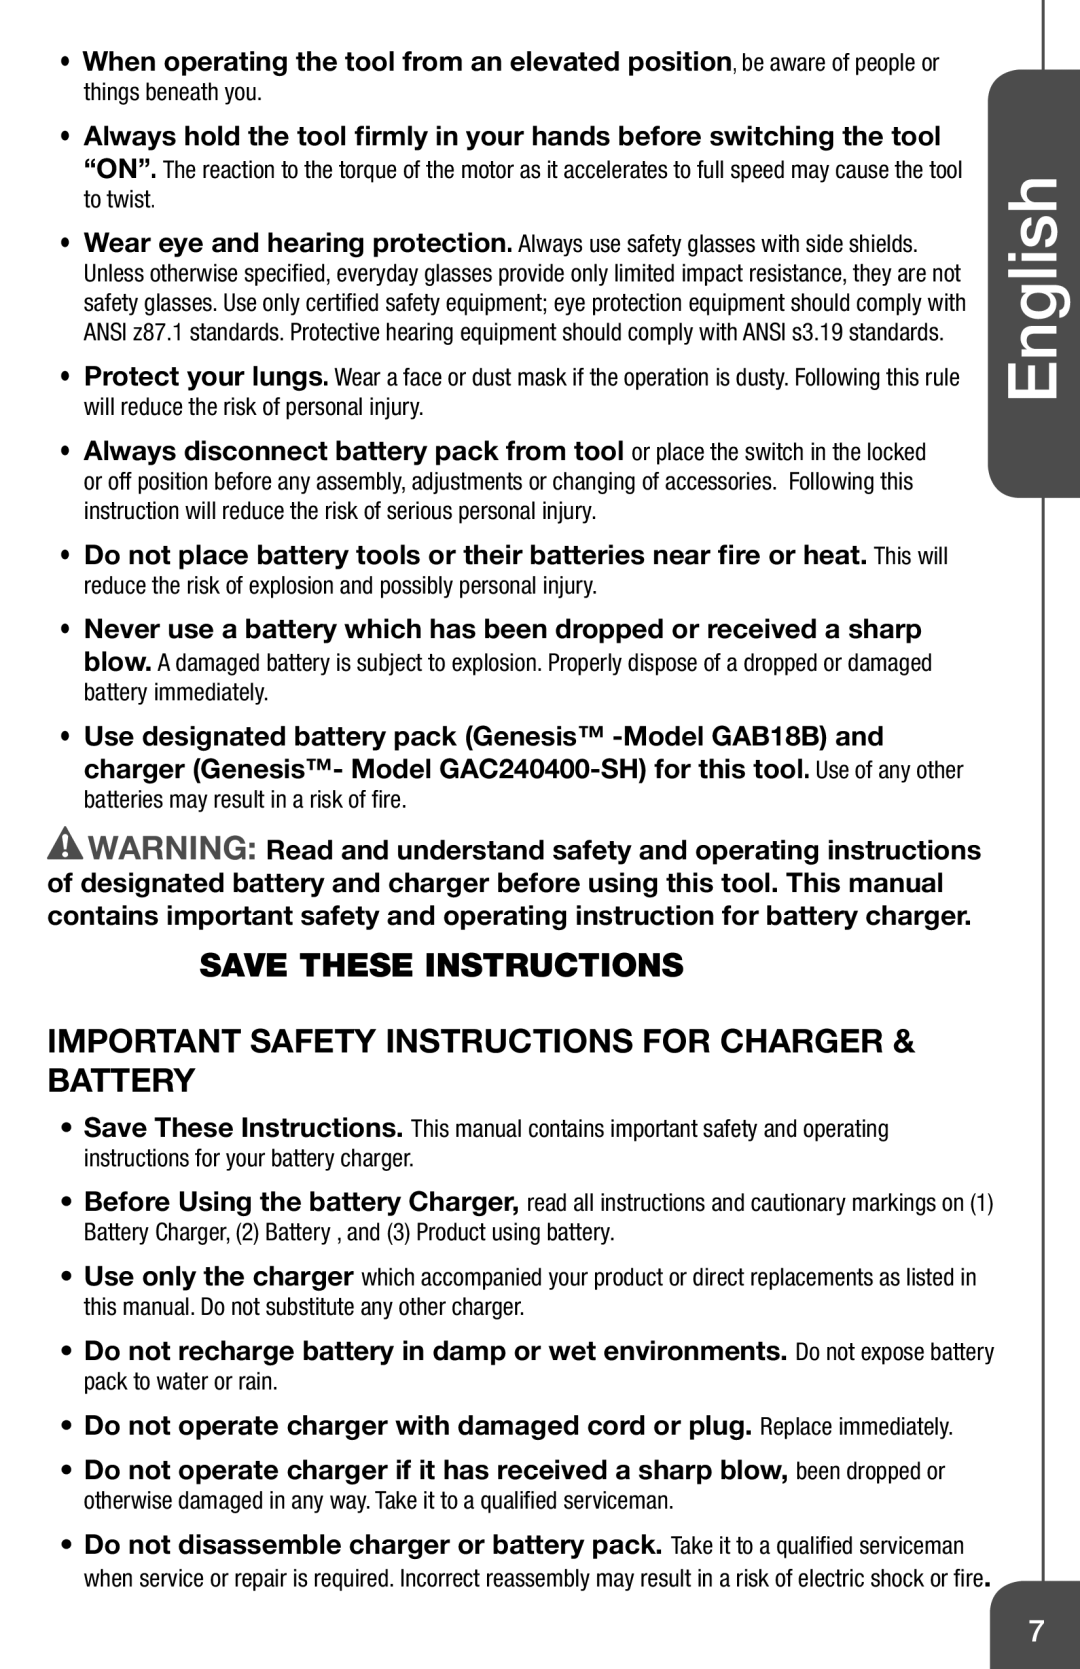 Genesis I.C.E GCD18BK Important Safety Instructions For Charger & Battery, English, Save These Instructions 